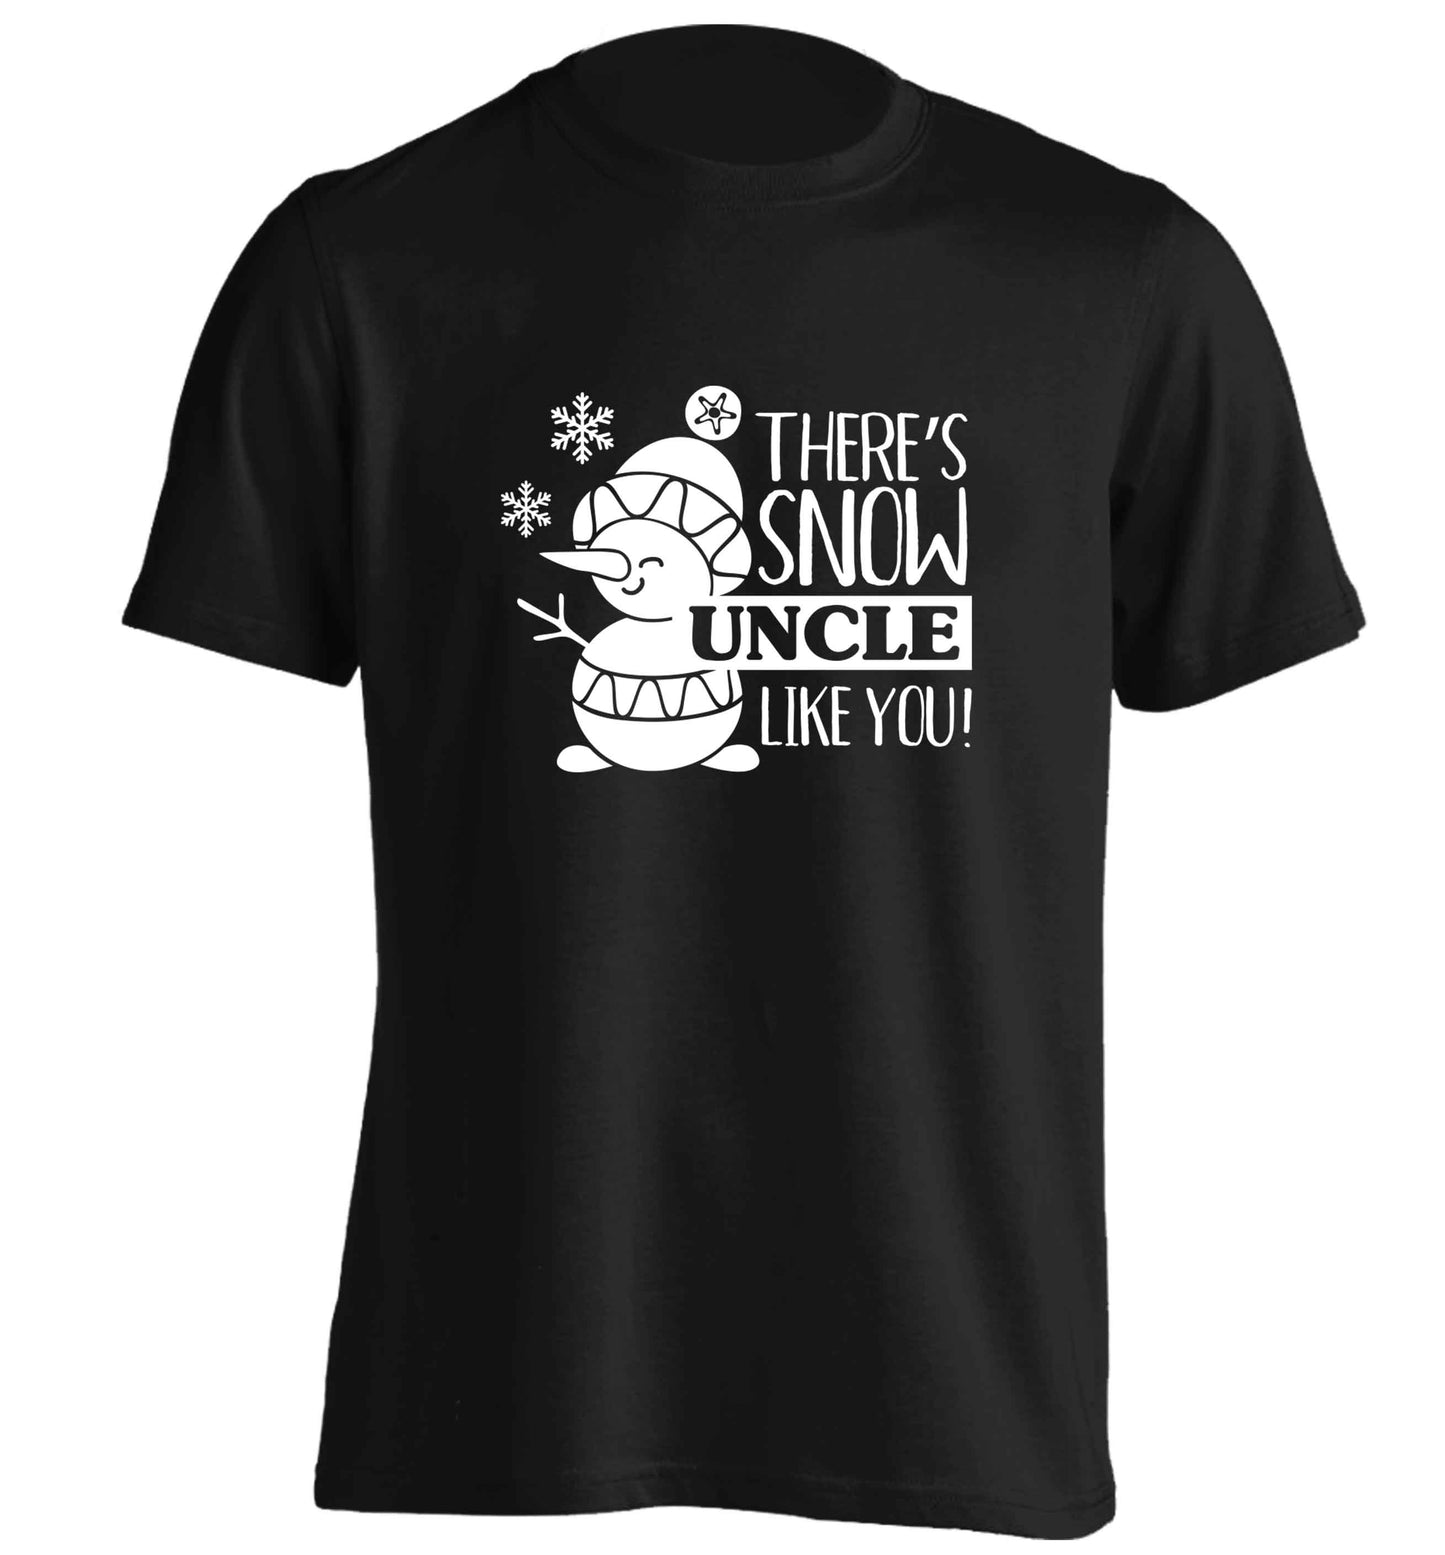 There's snow uncle like you adults unisex black Tshirt 2XL